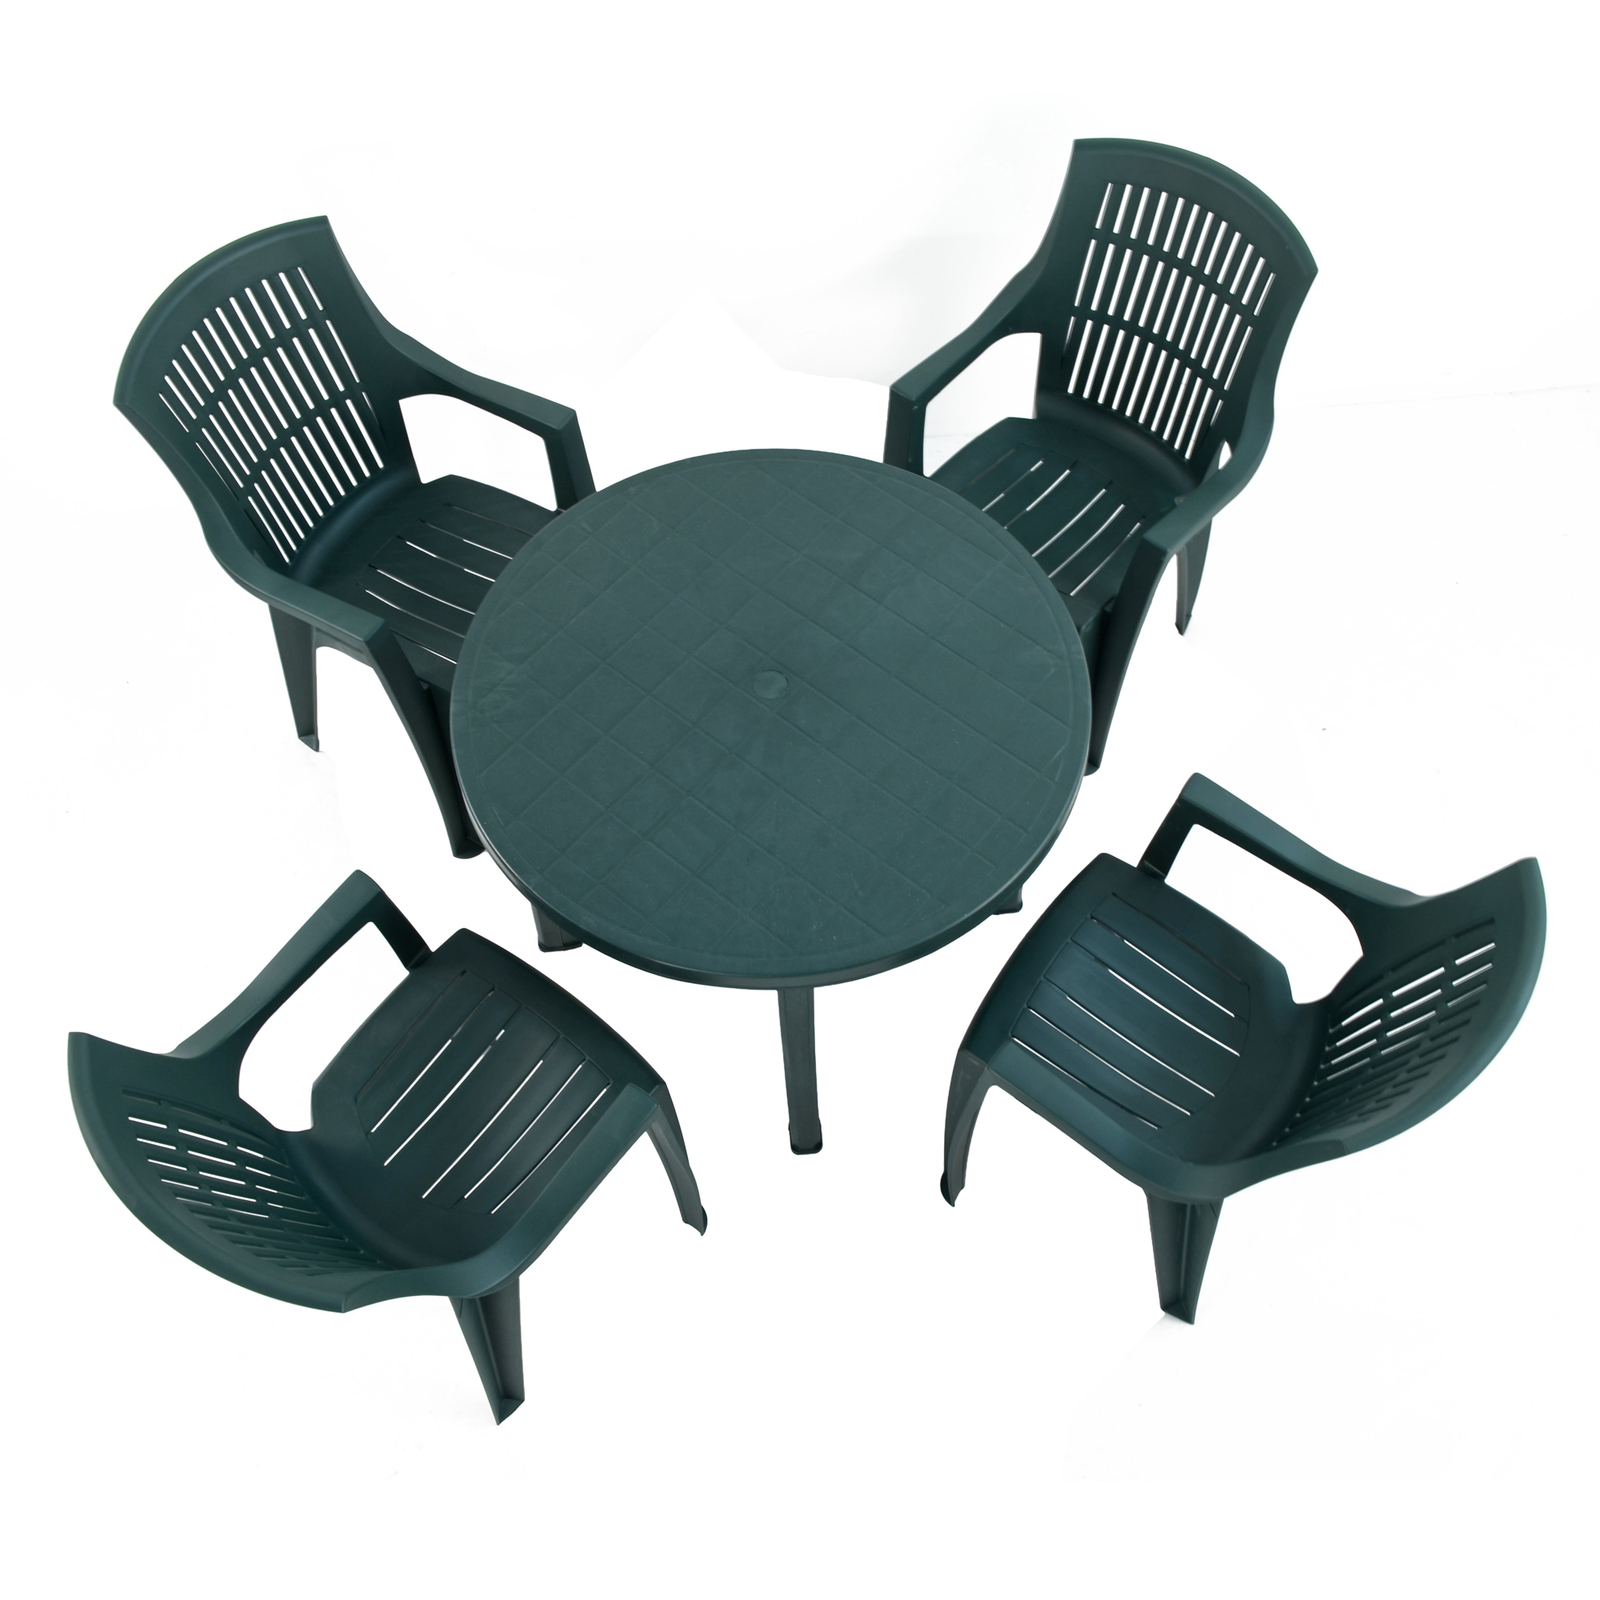 Trabella Revello Round Table With 4 Parma Chairs Set Green Dining Sets Trabella   